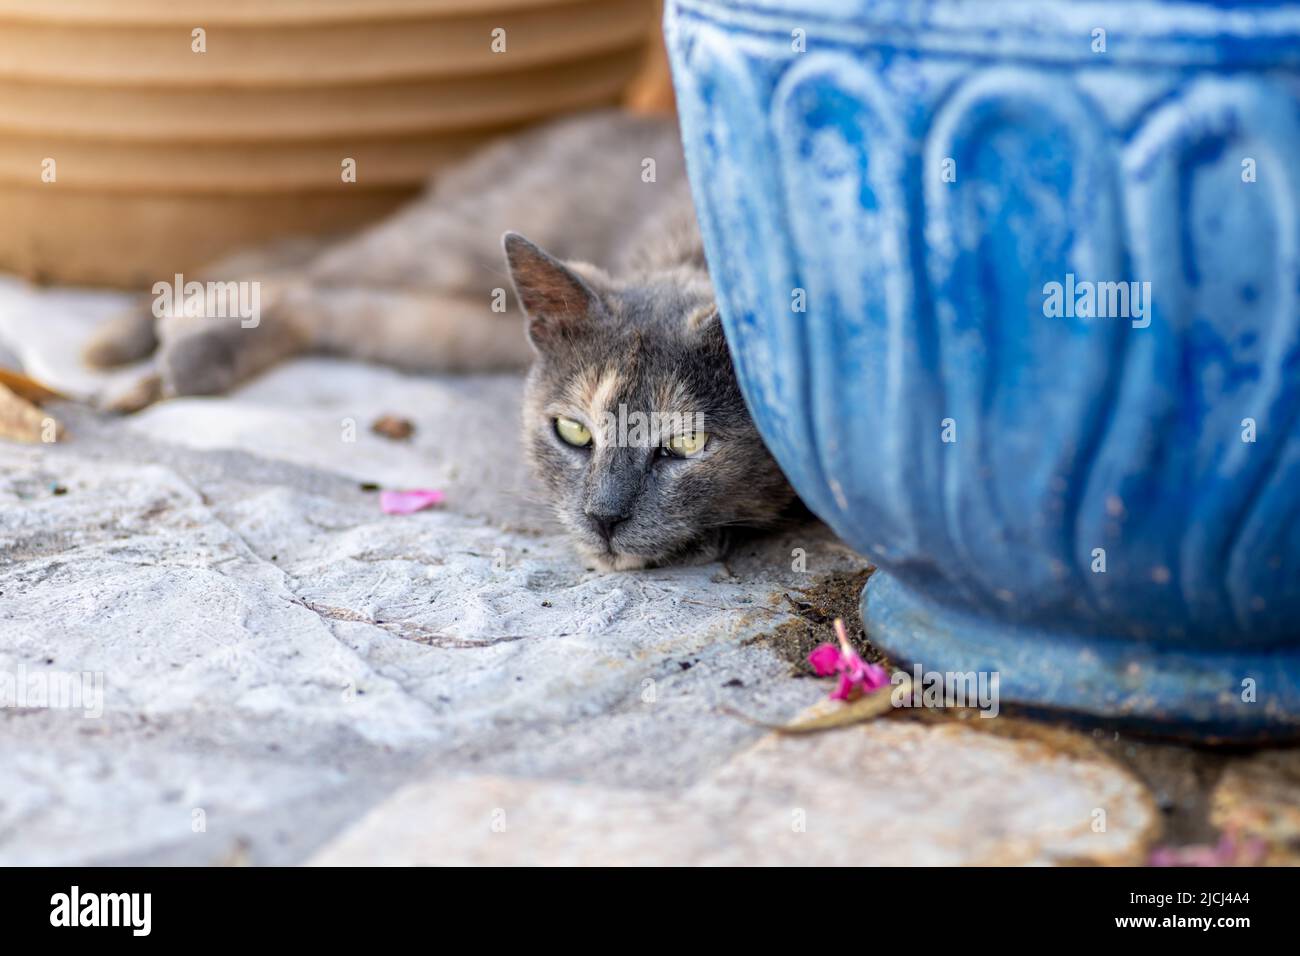 A grey cat with mesmerising eyes resting between two plant pots. Stock Photo